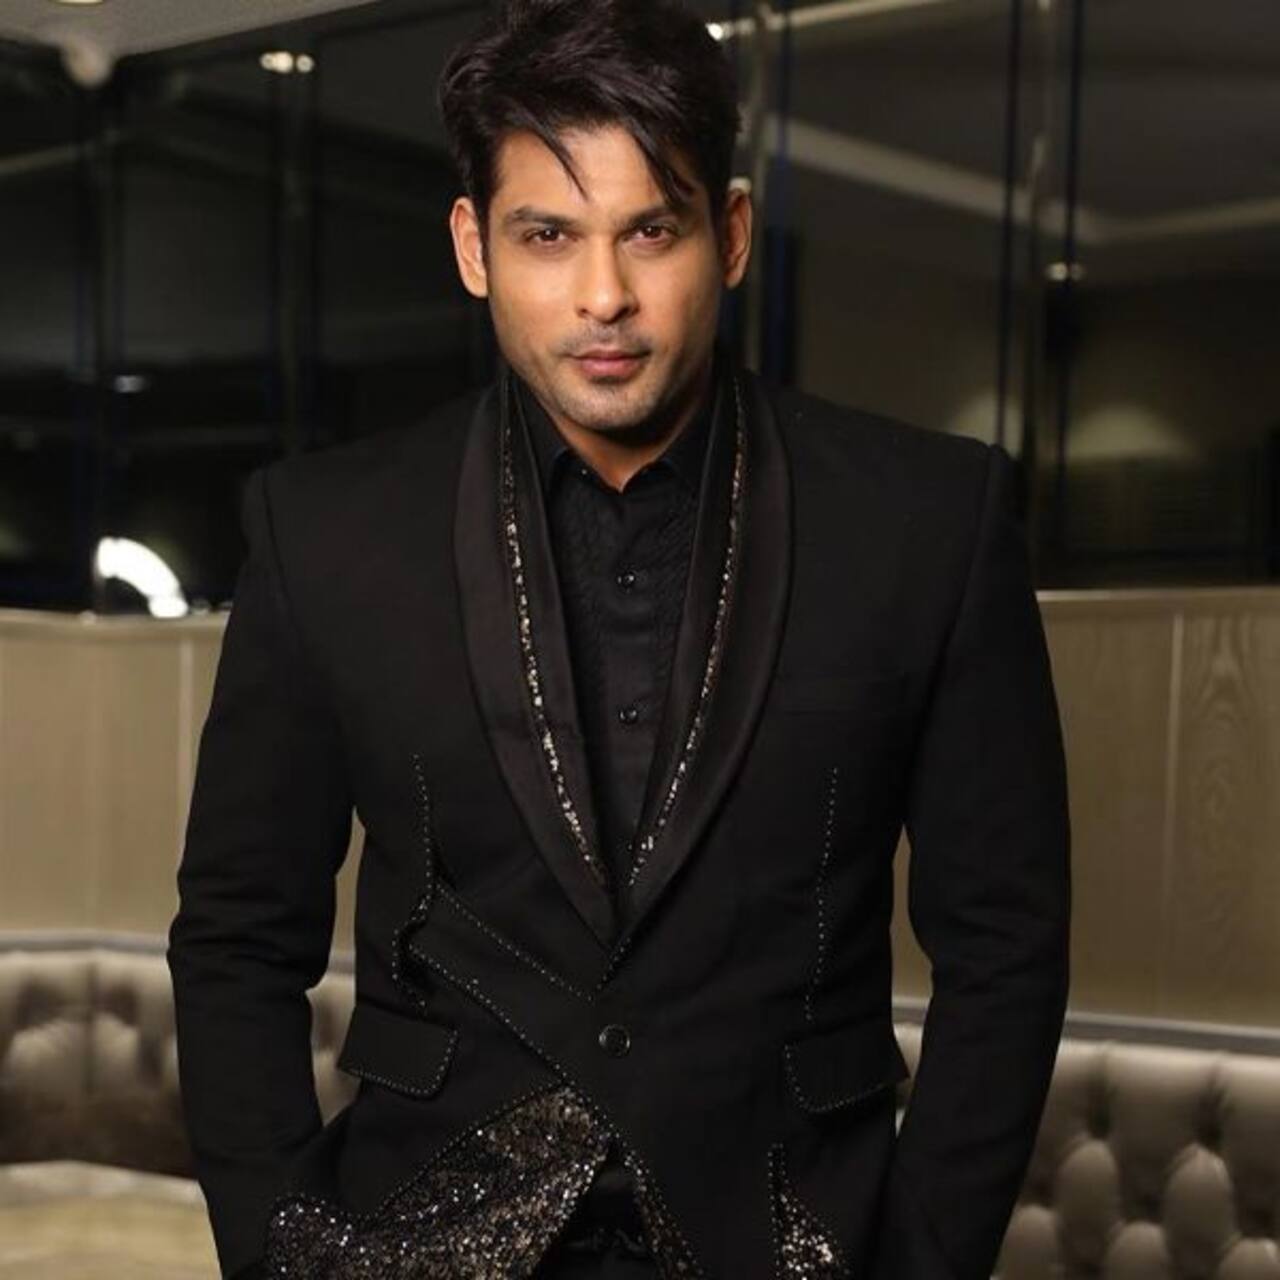 Bigg Boss 14 Sidharth Shukla Is Making All The Right Noises With His Upgraded Fashion Game